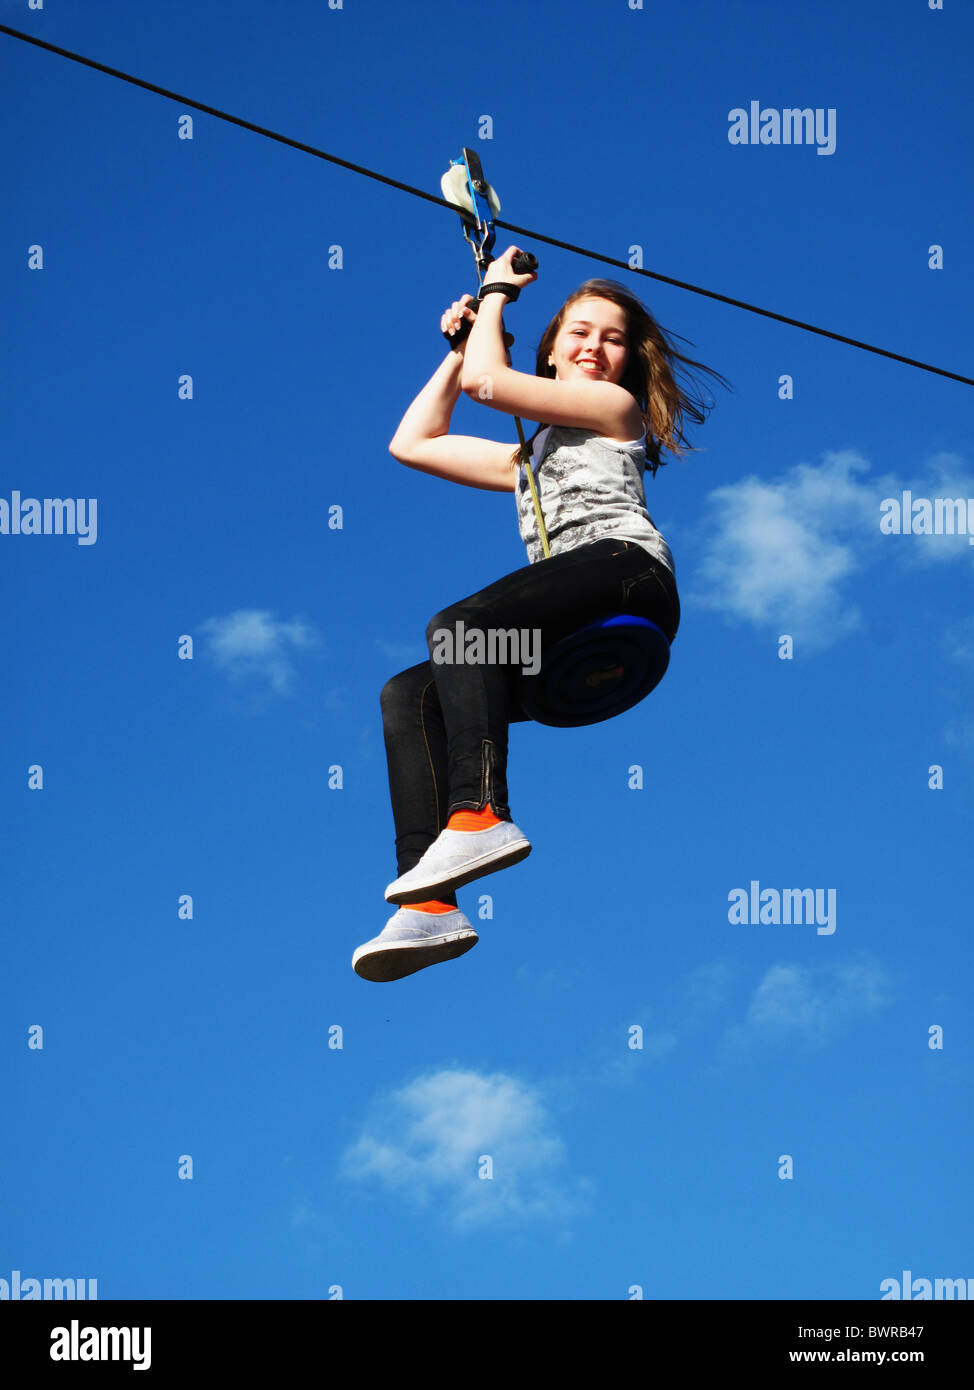 Young girl on zip wire Stock Photo